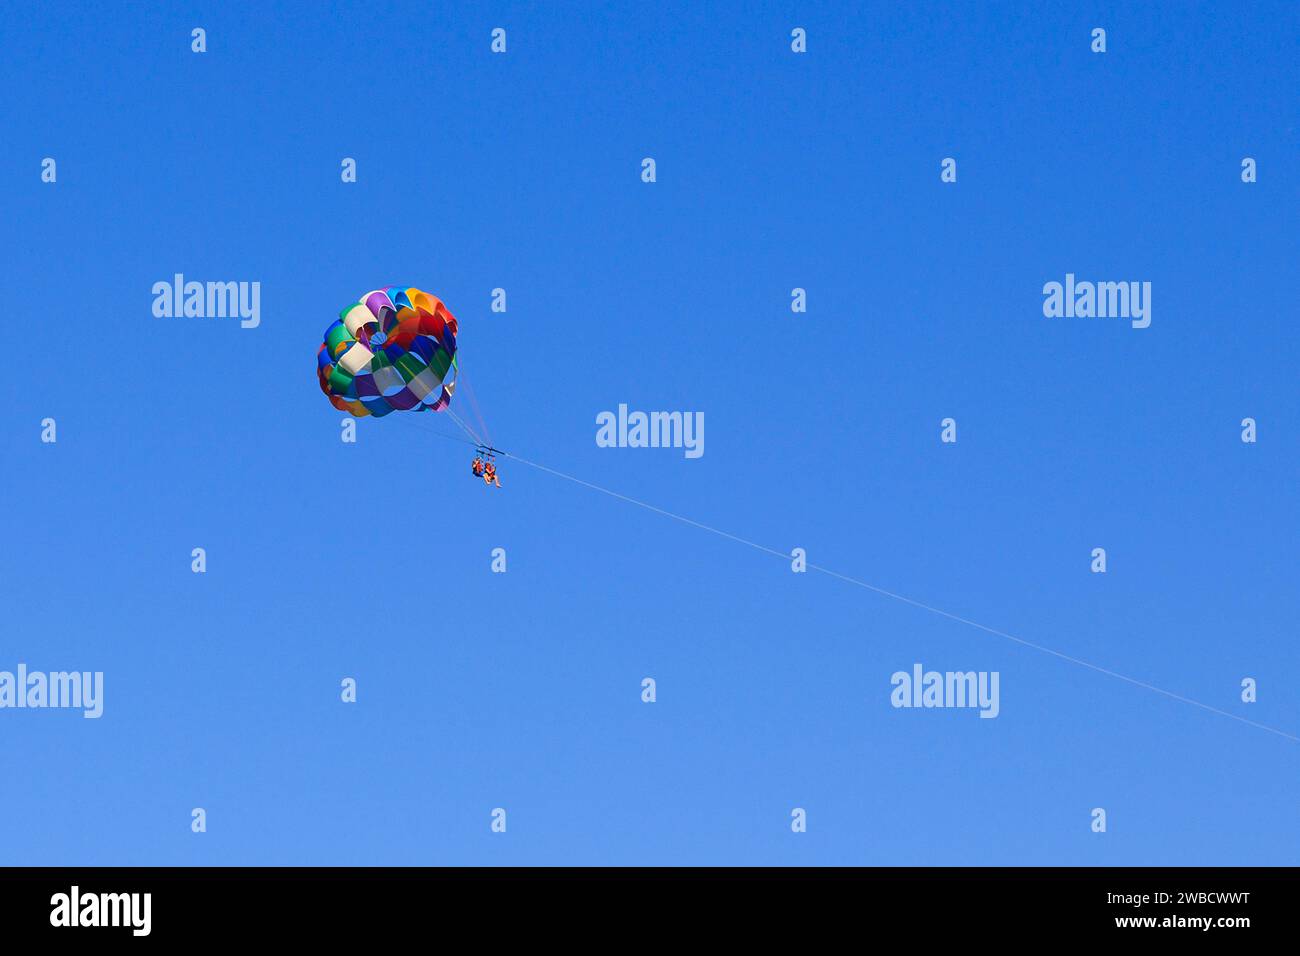 BARSELONA, SPAIN - MAY 13, 2017: These are unidentified people in a parachute flight while doing parasailing. Stock Photo